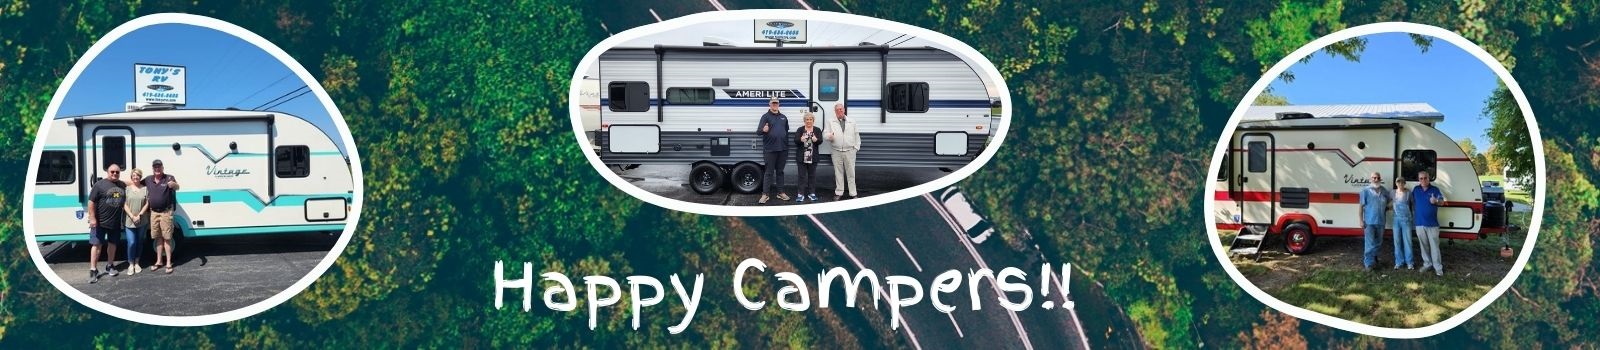 happy campers